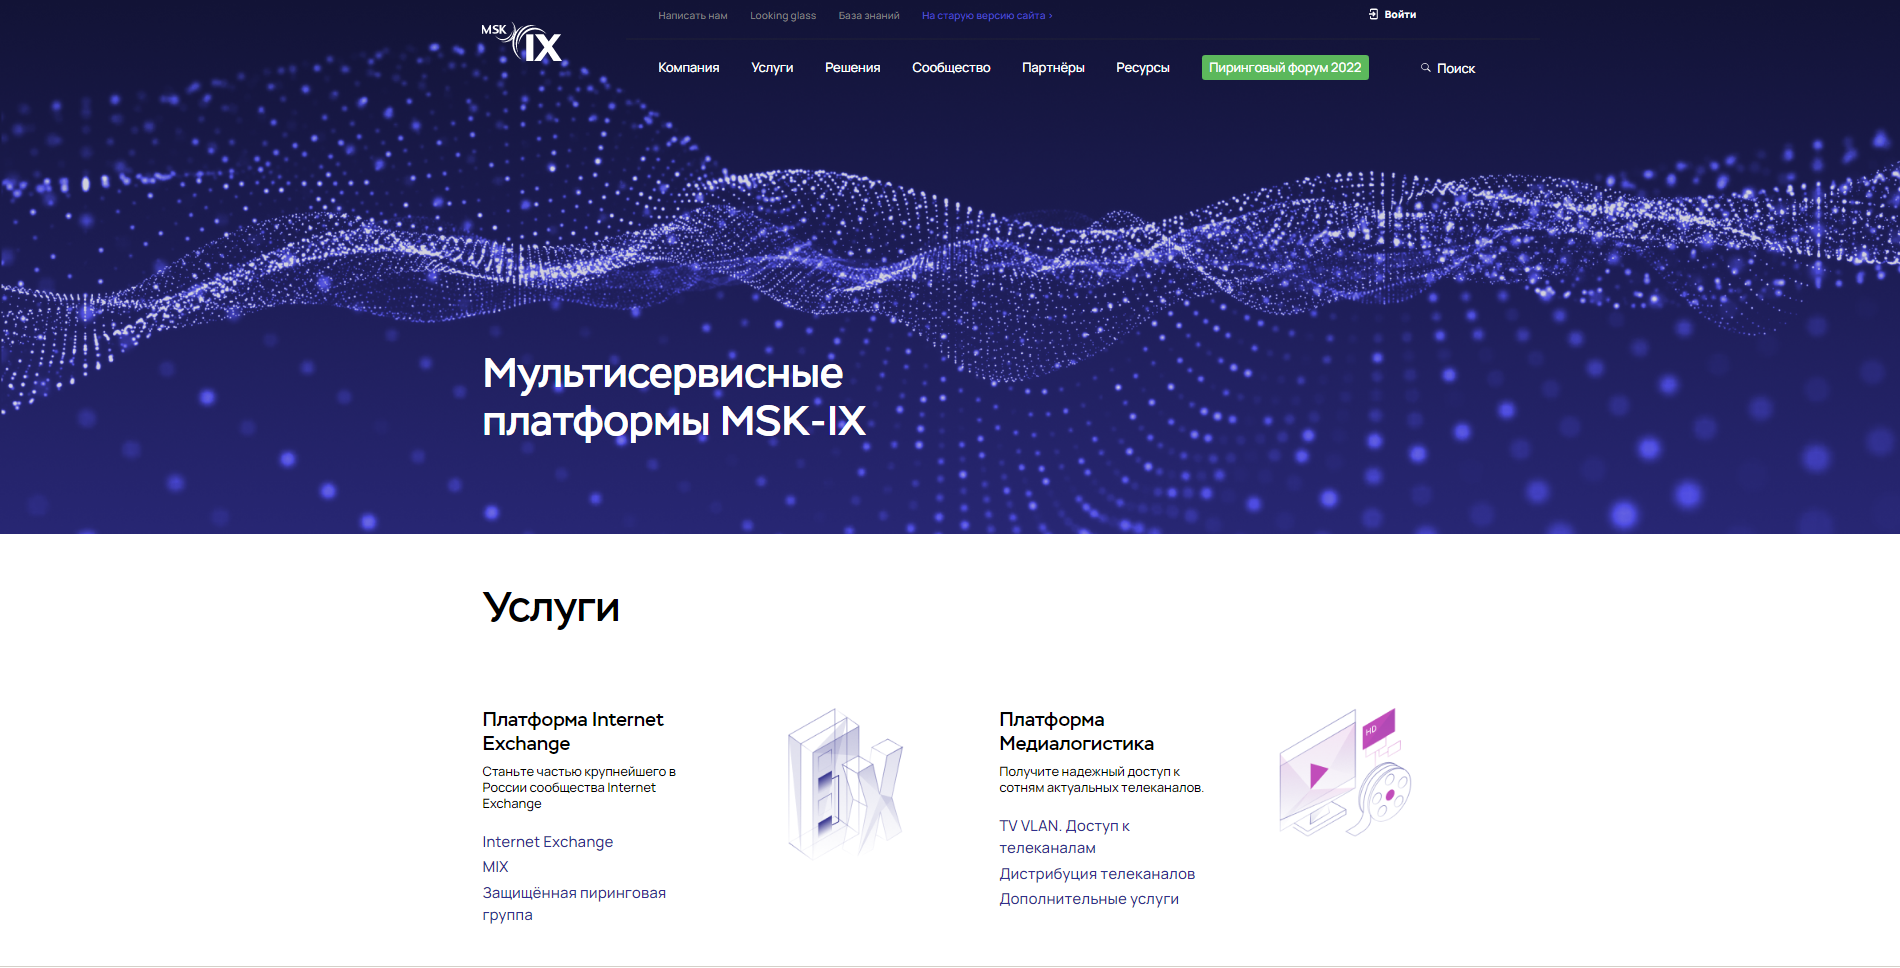 msk-ix-celebrates-new-year-with-a-new-website